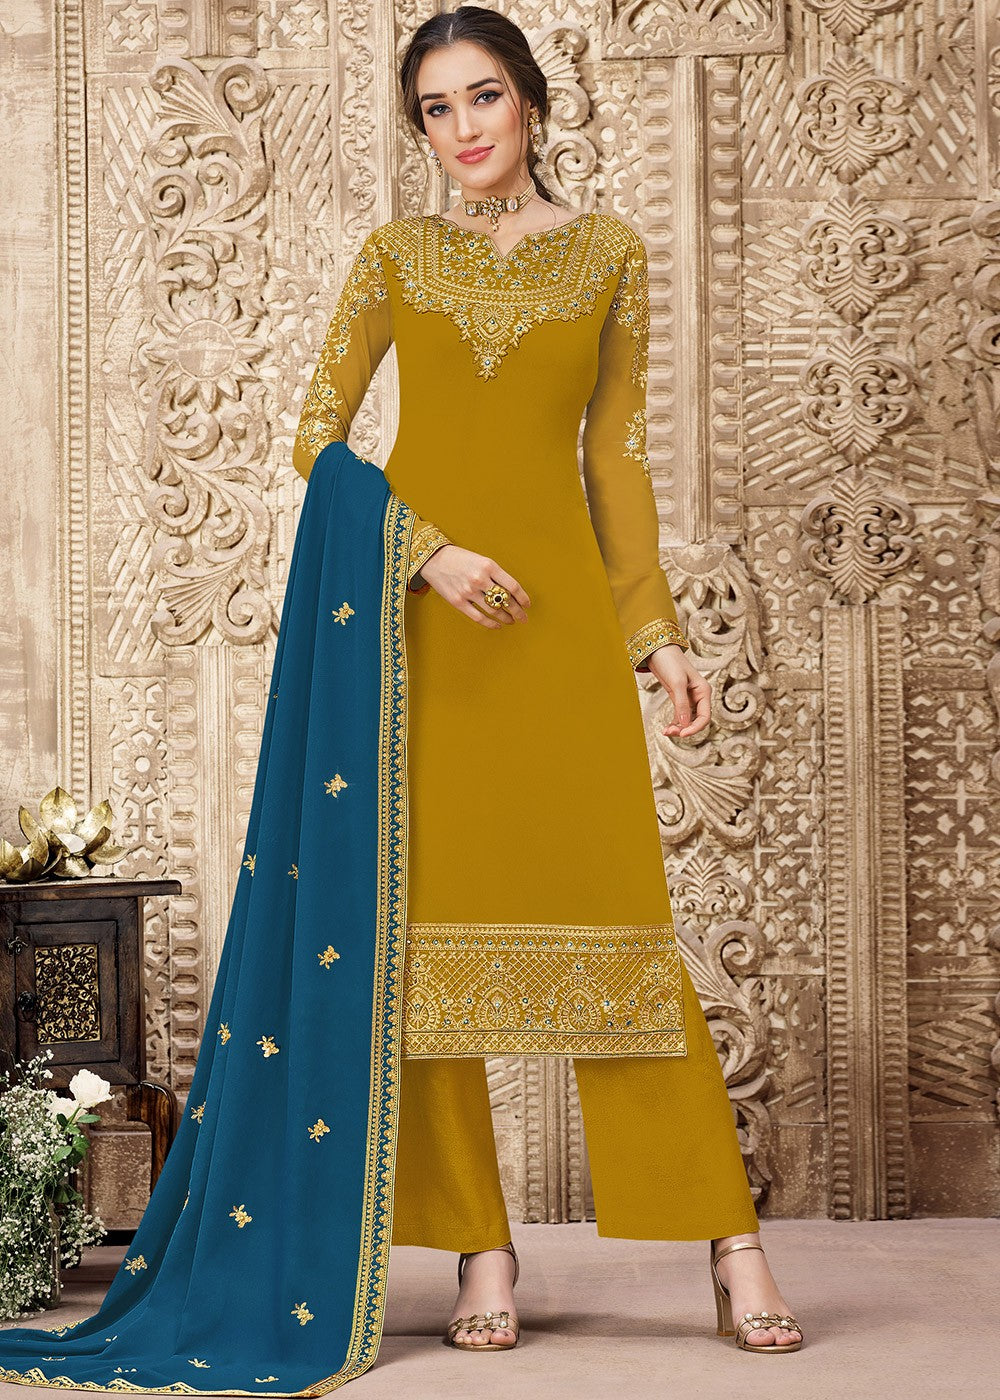 Buy Georgette Mustard Yellow Suit - Heavy Embroidered Pant Suit